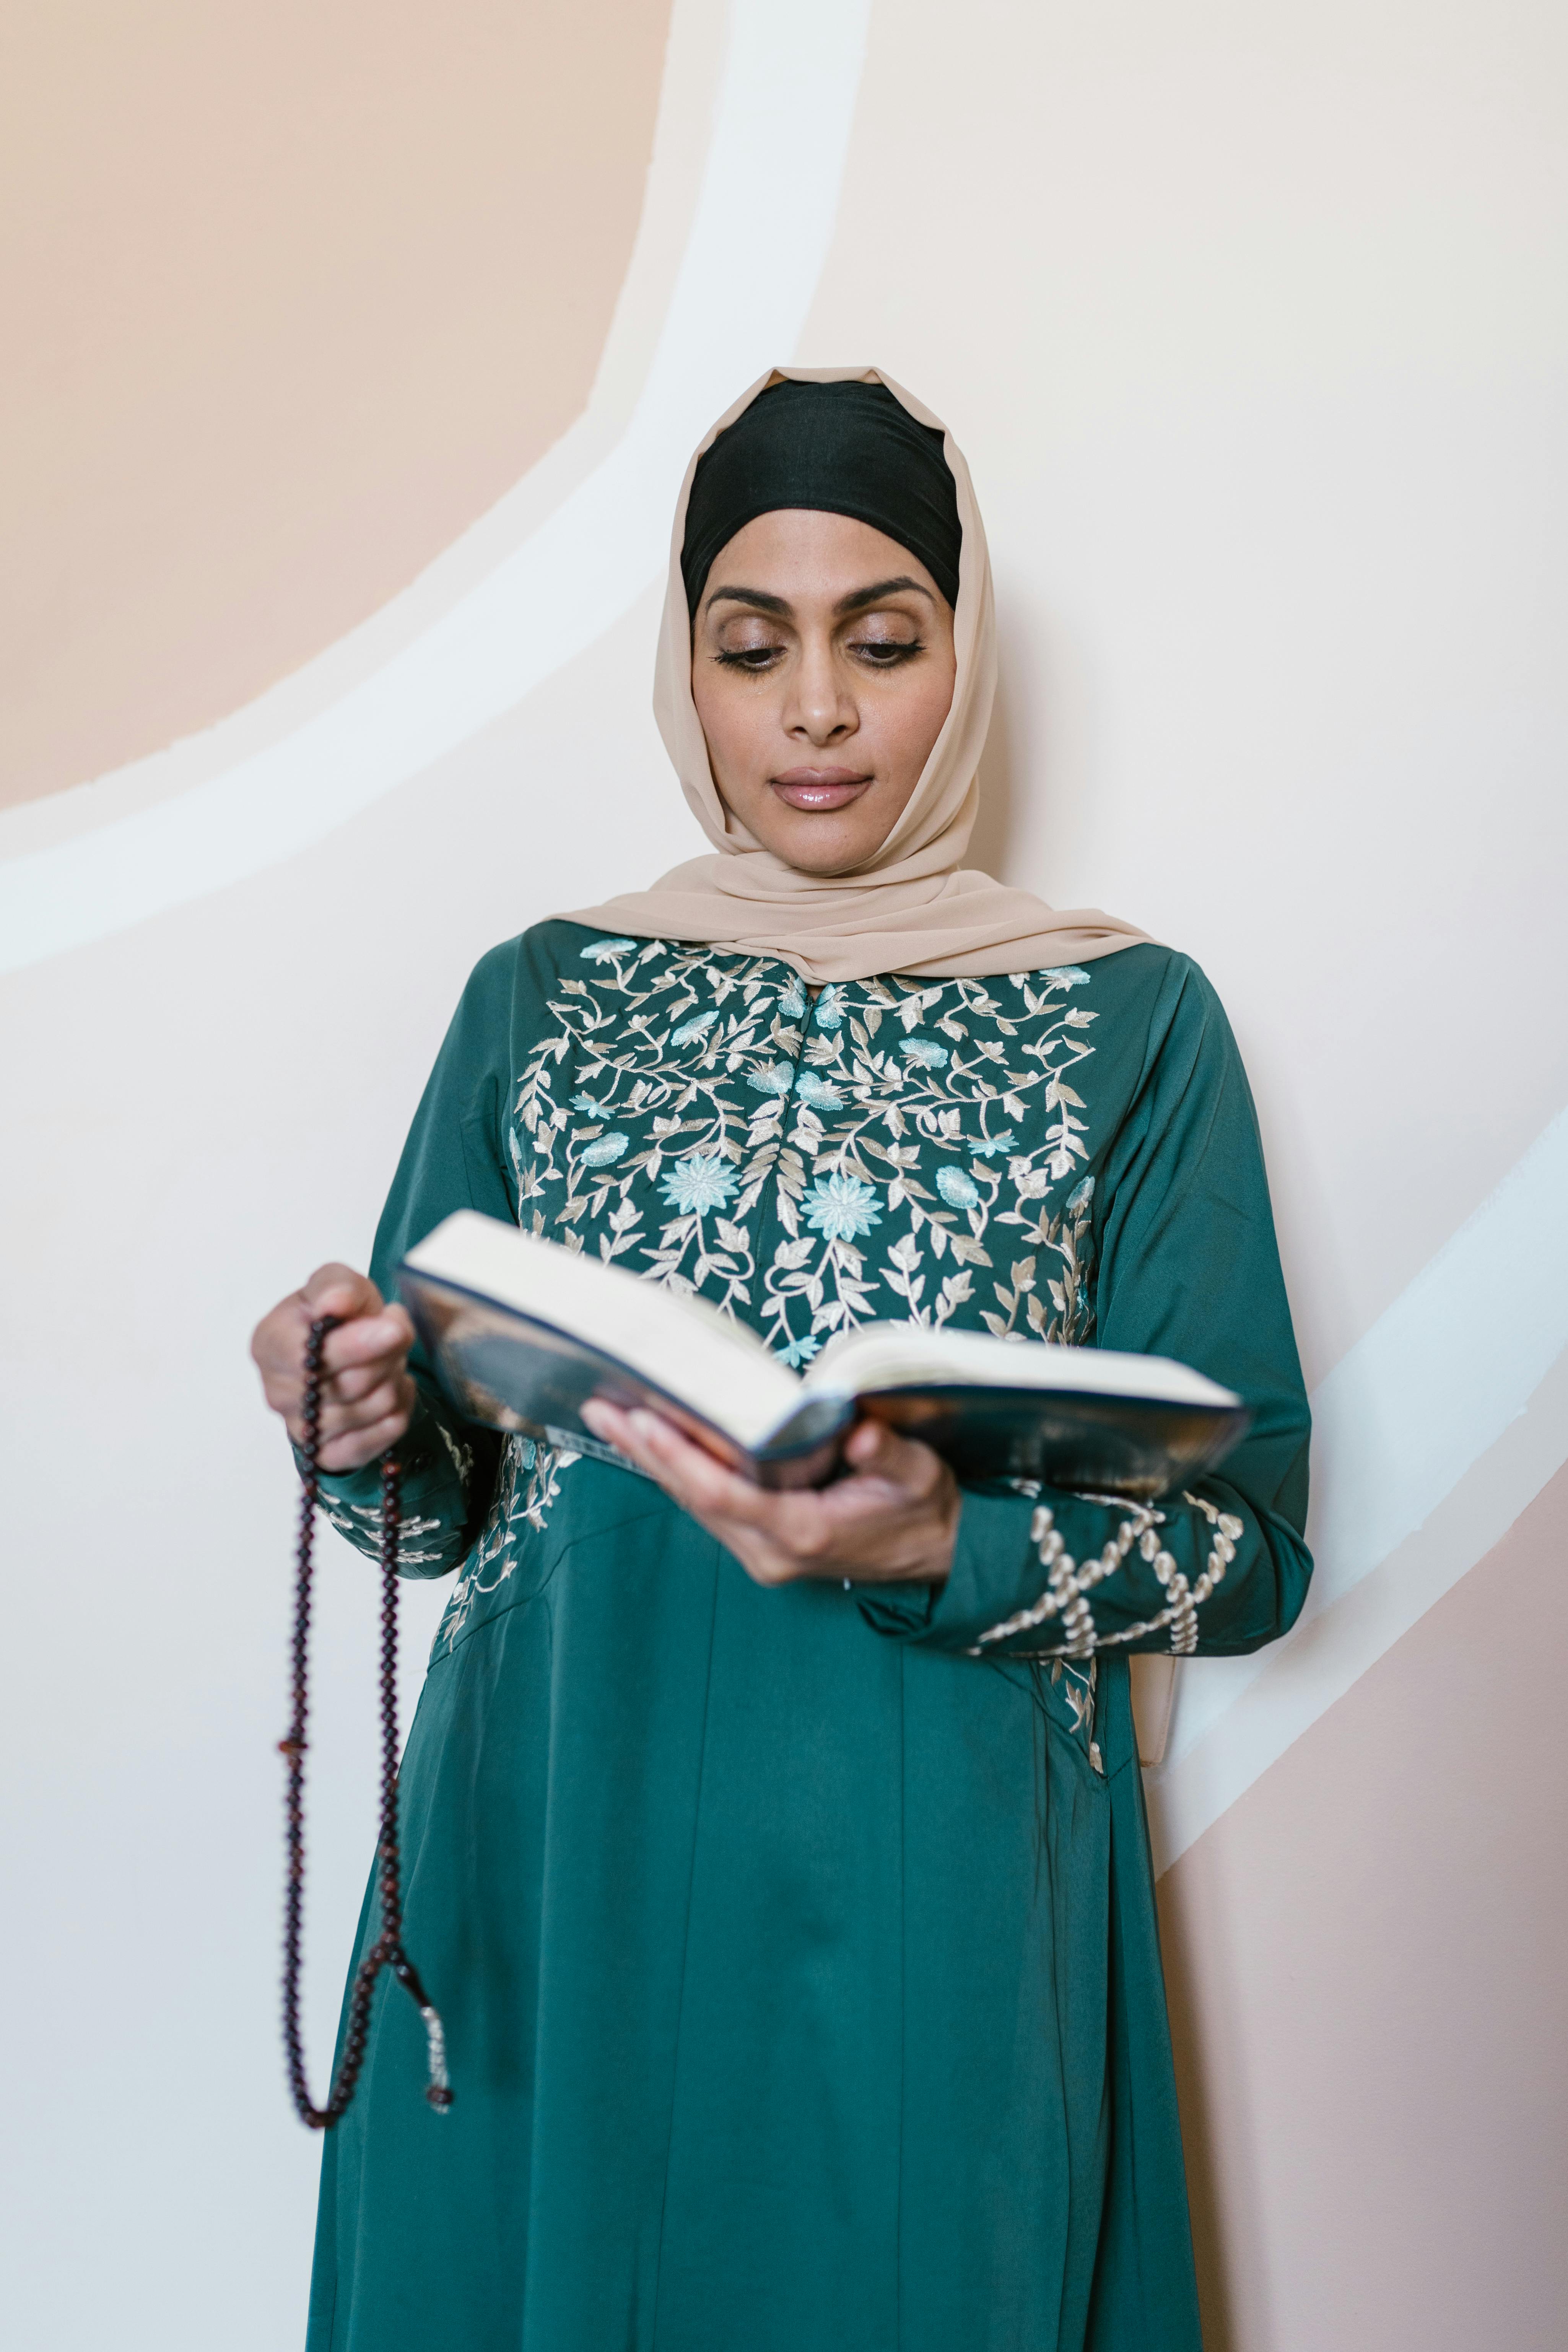 woman in green and white hijab holding a holy book